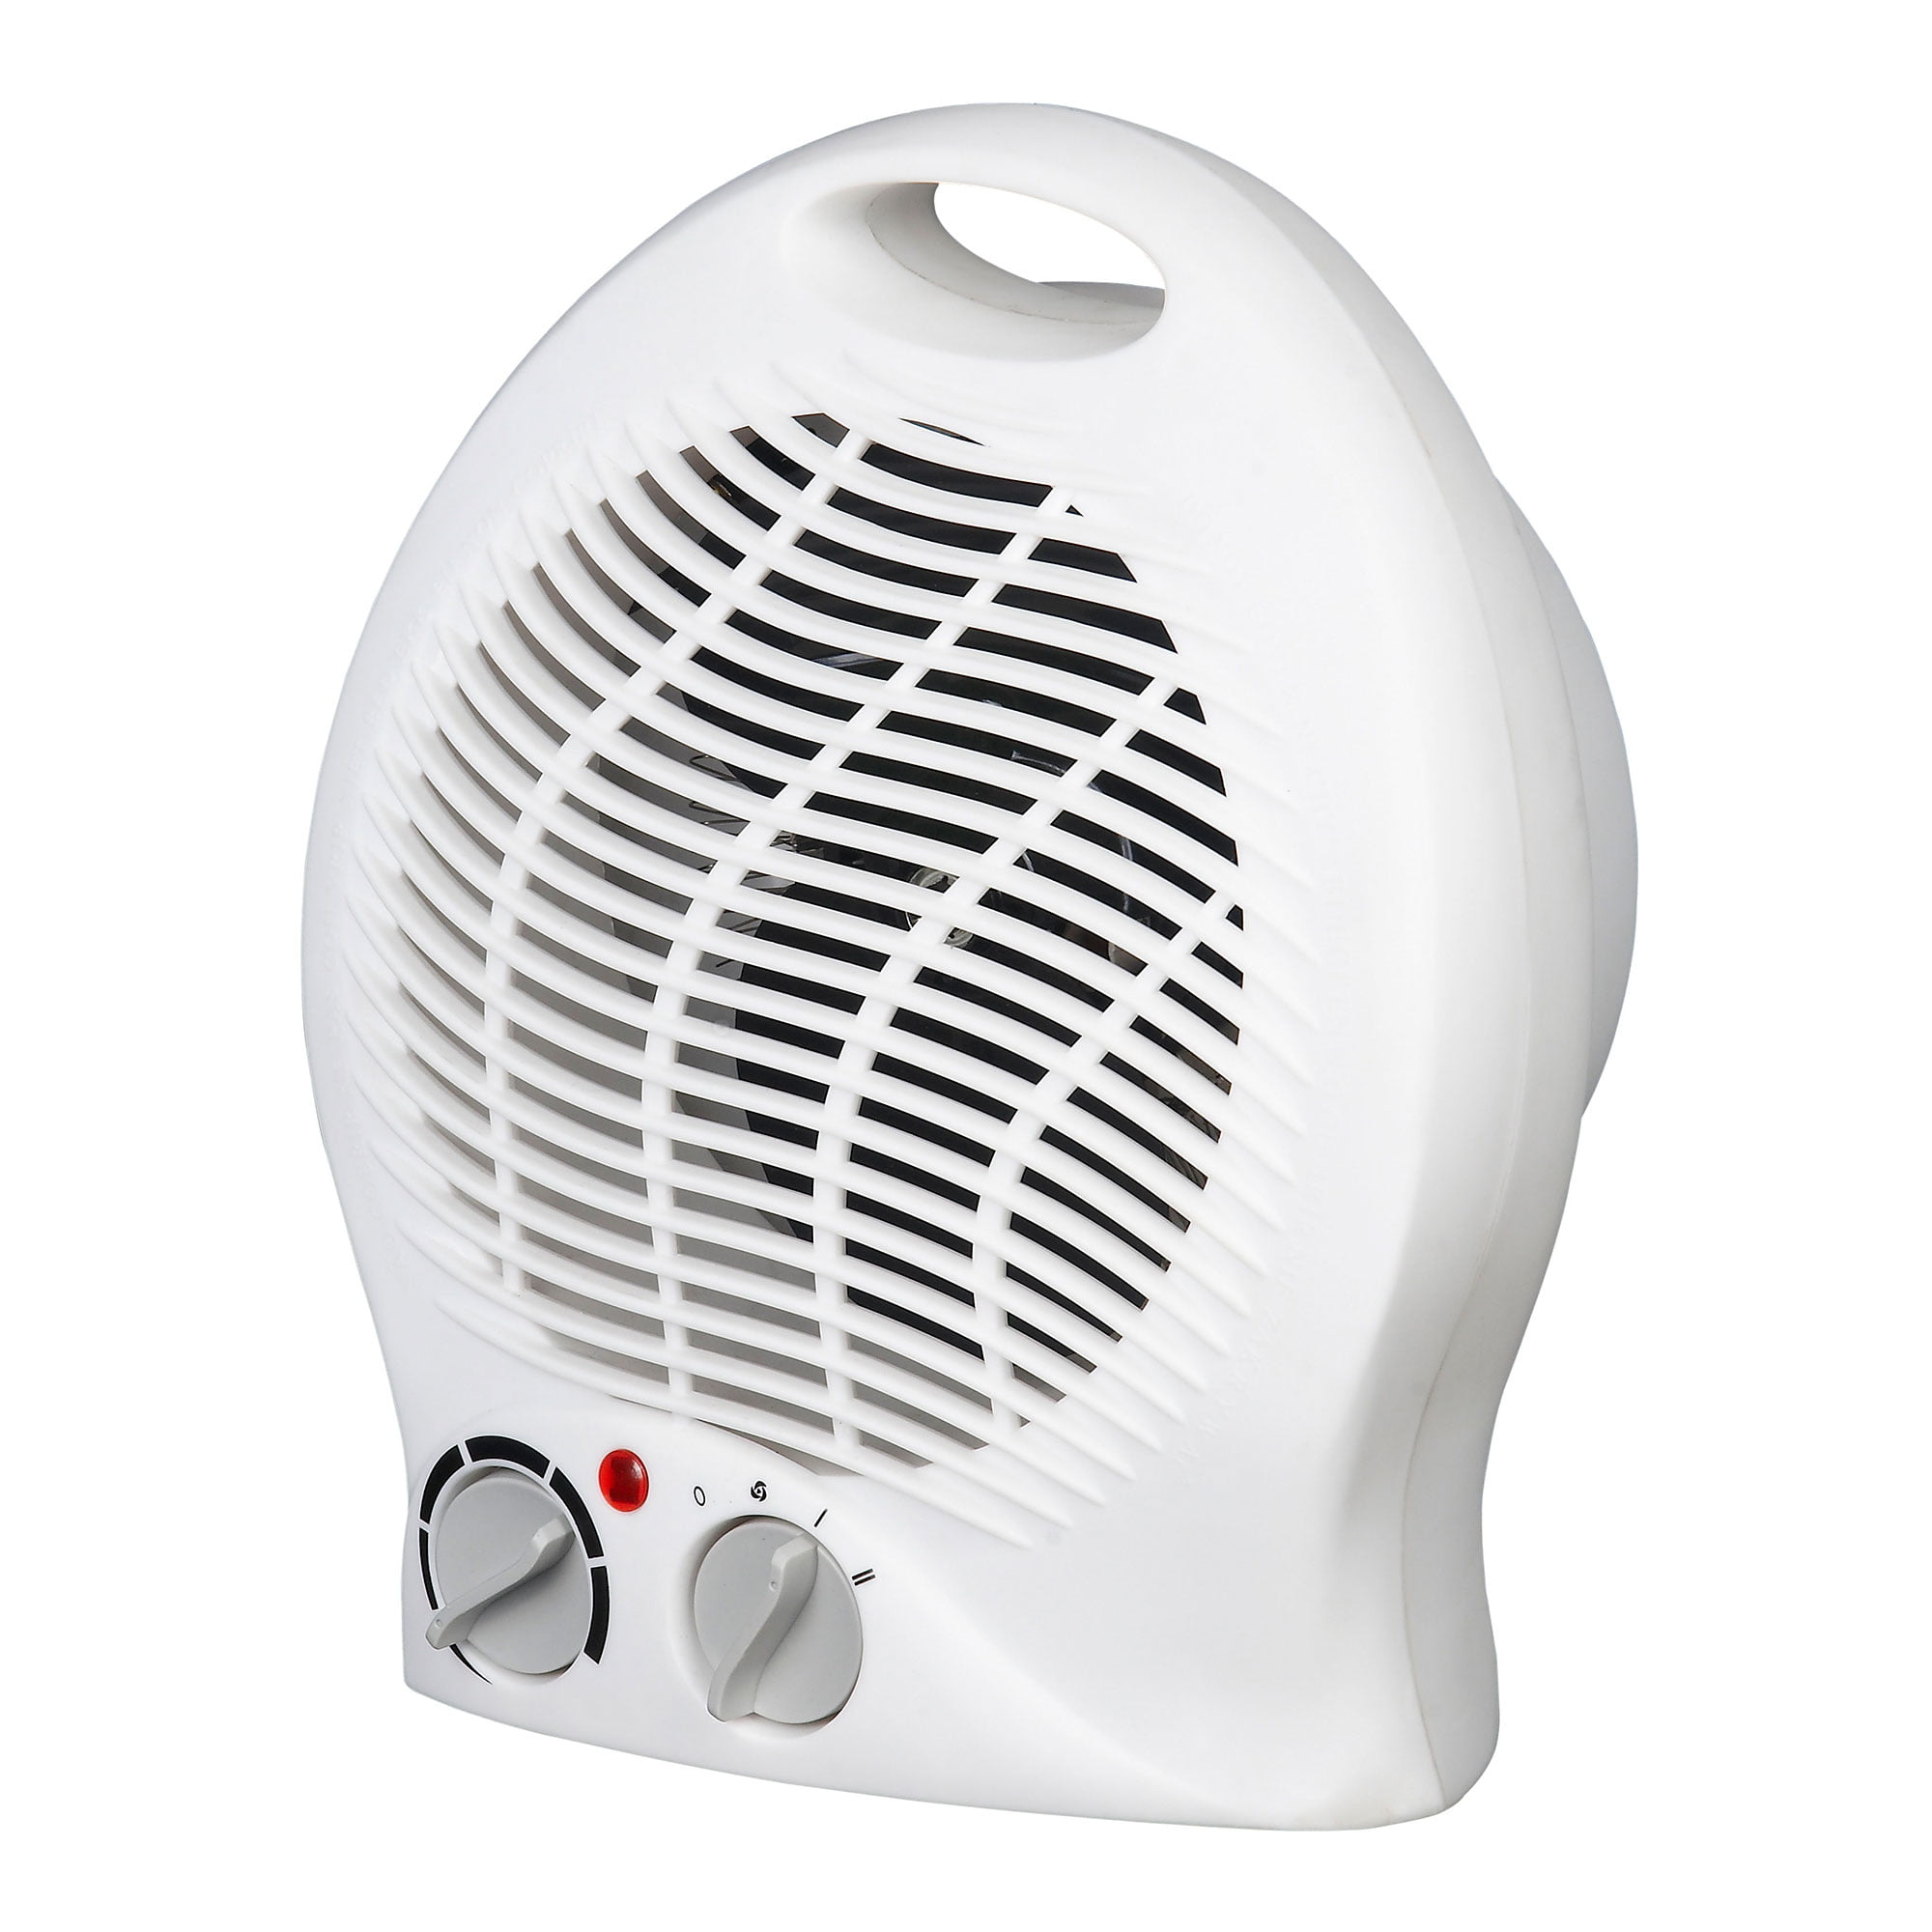 What May Be The Safest Portable Heater?